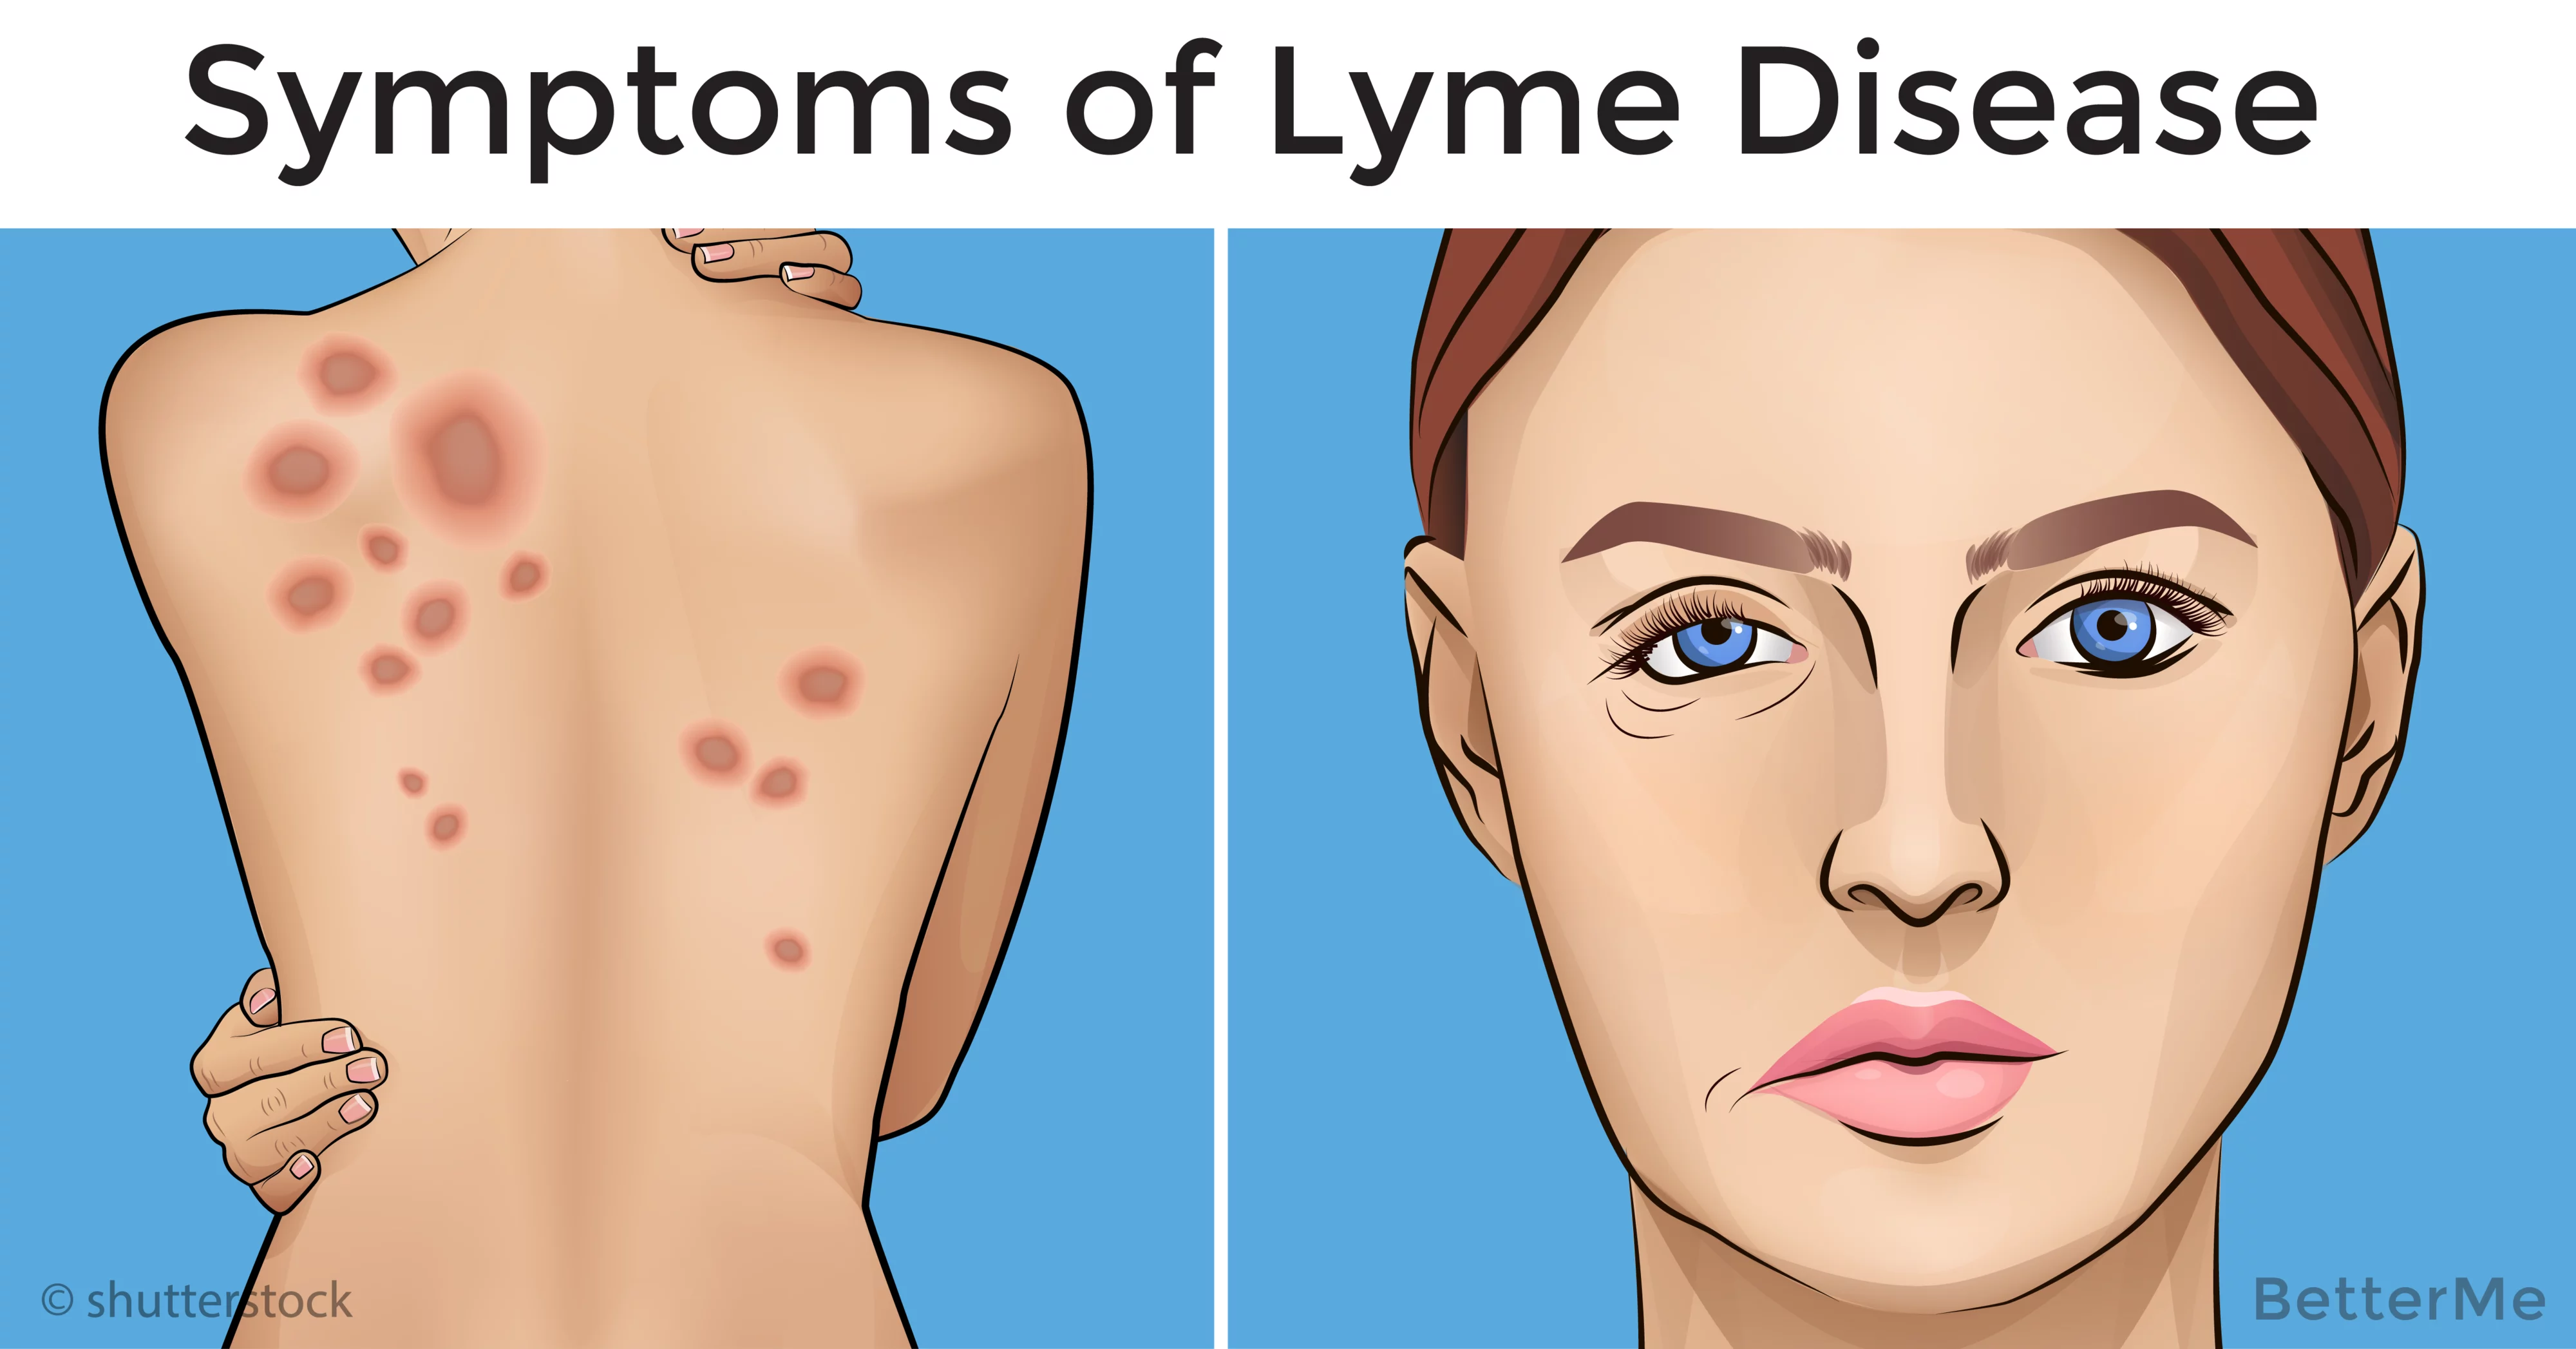 Be careful! You could have lyme disease and not even know it.